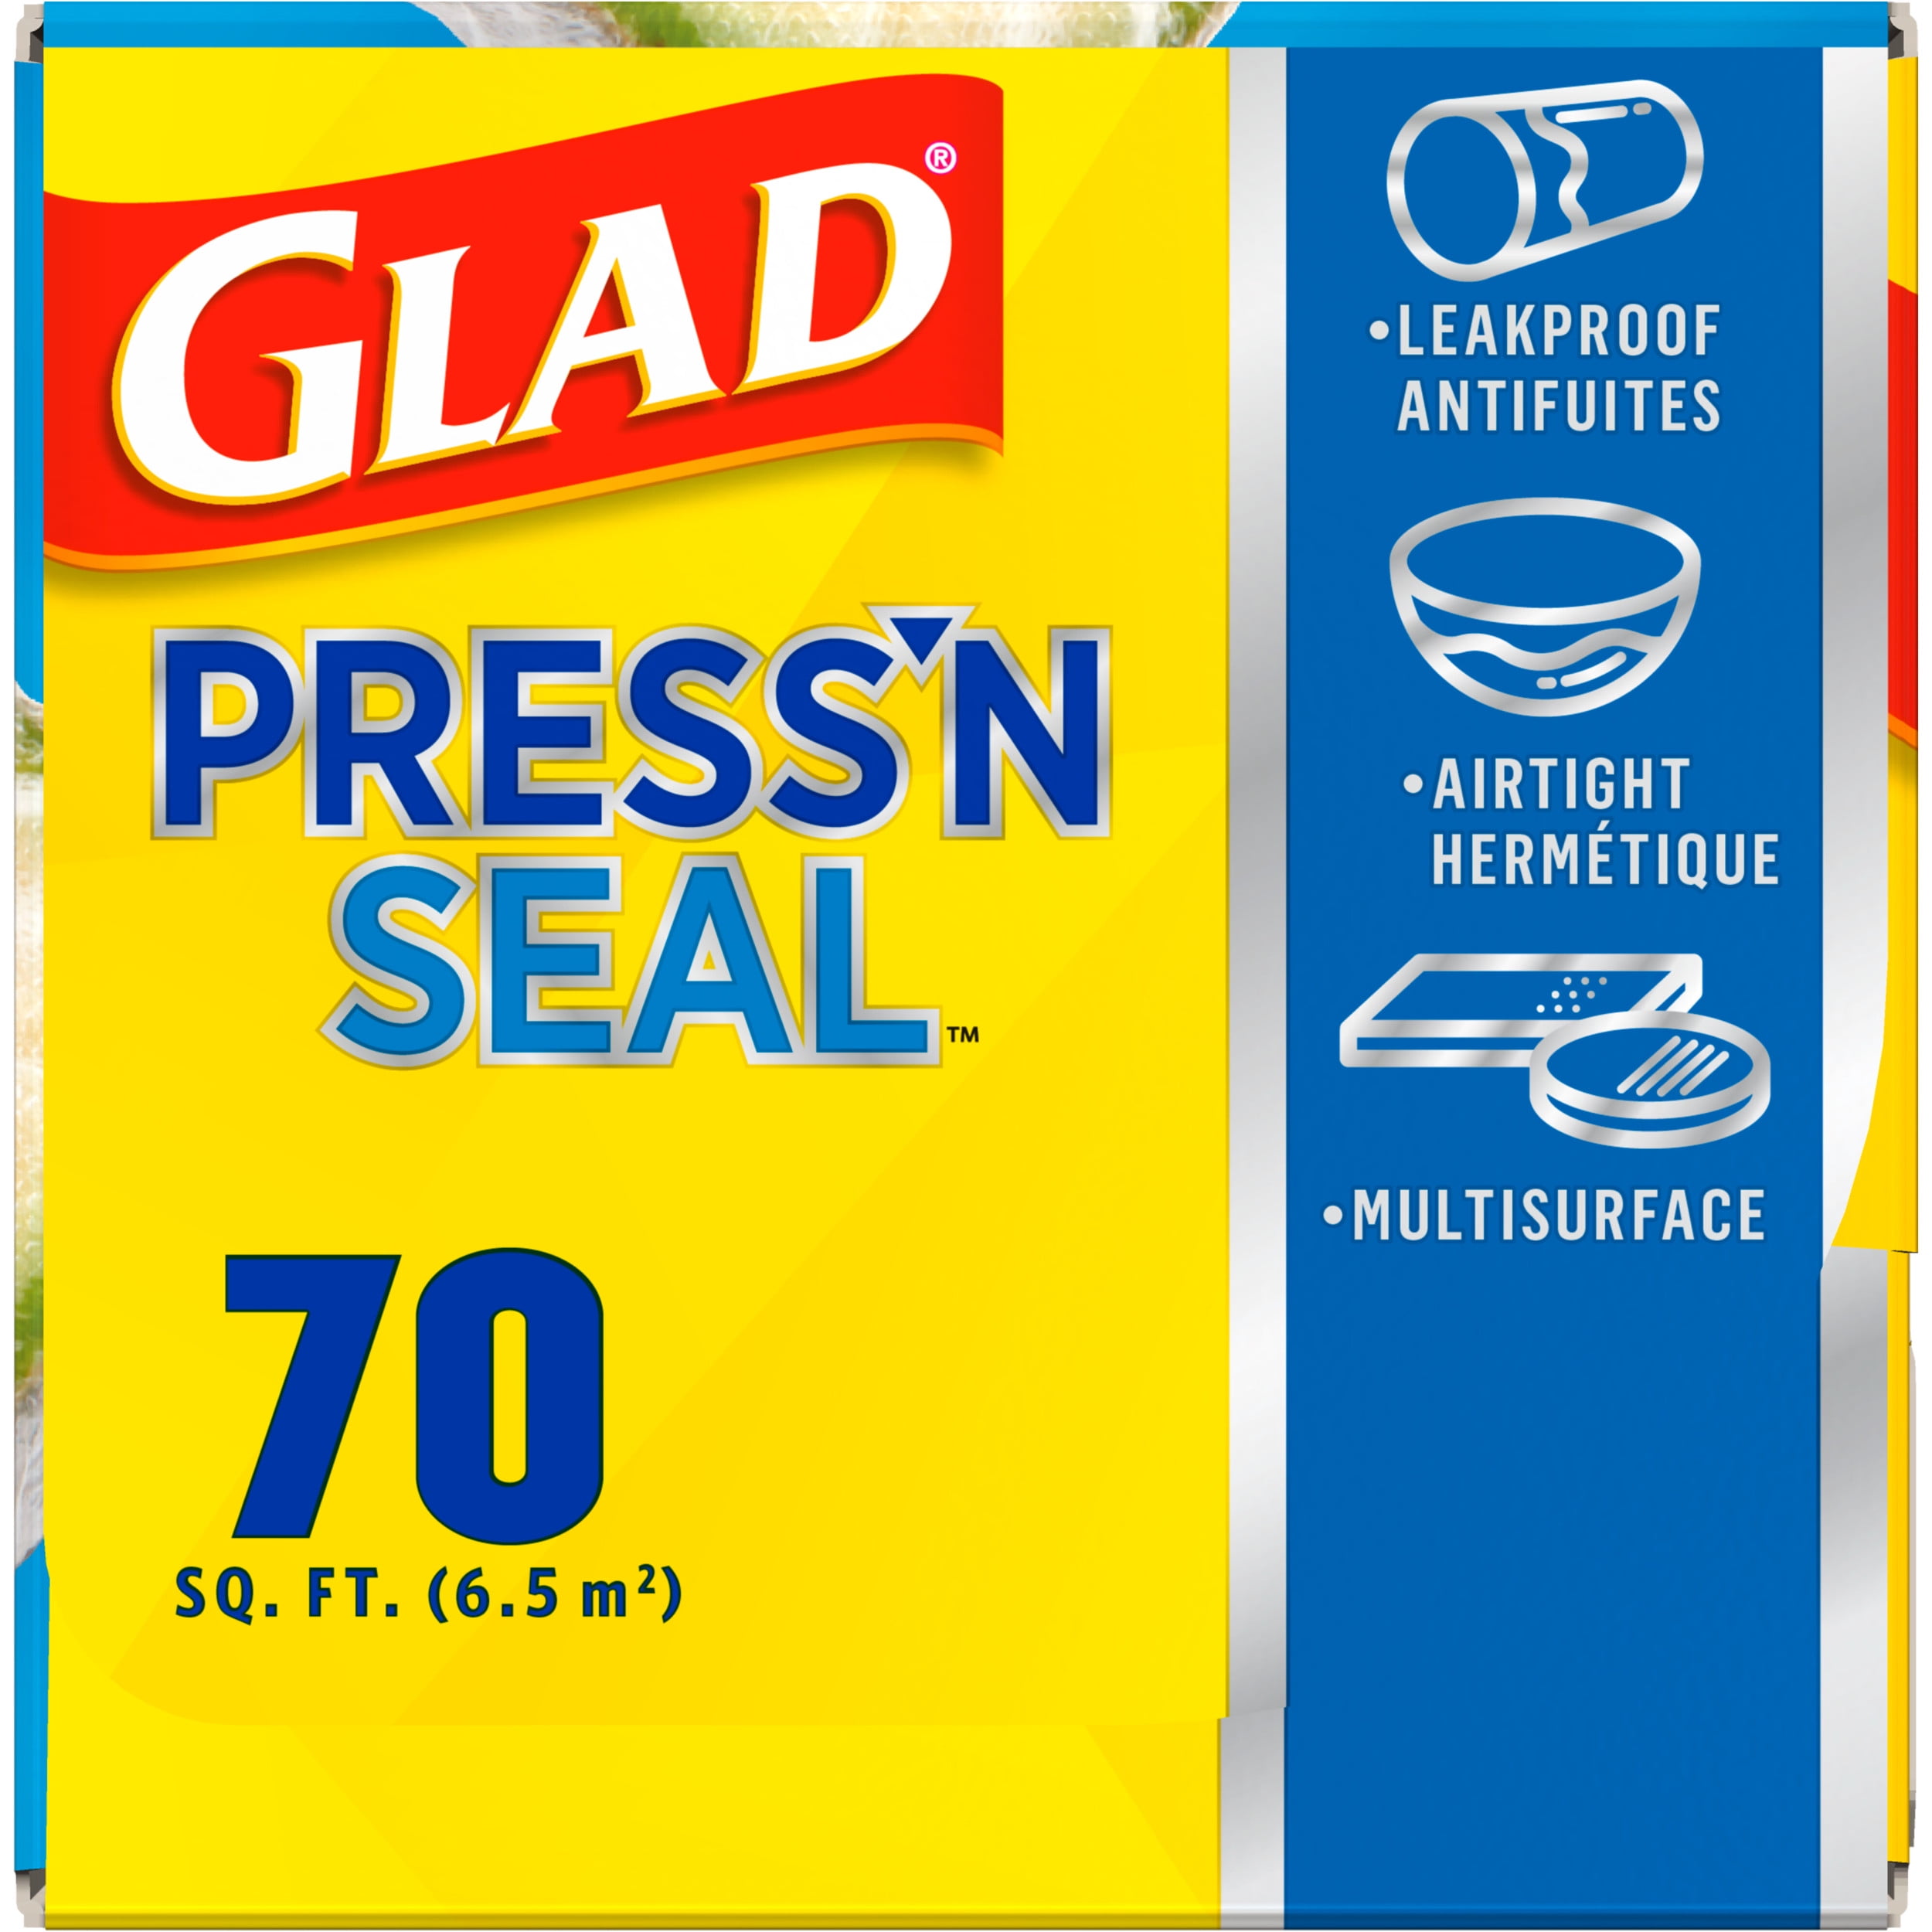 Glad Press'n Seal Plastic Food Wrap - 70 Square Foot Roll (Package May Vary)